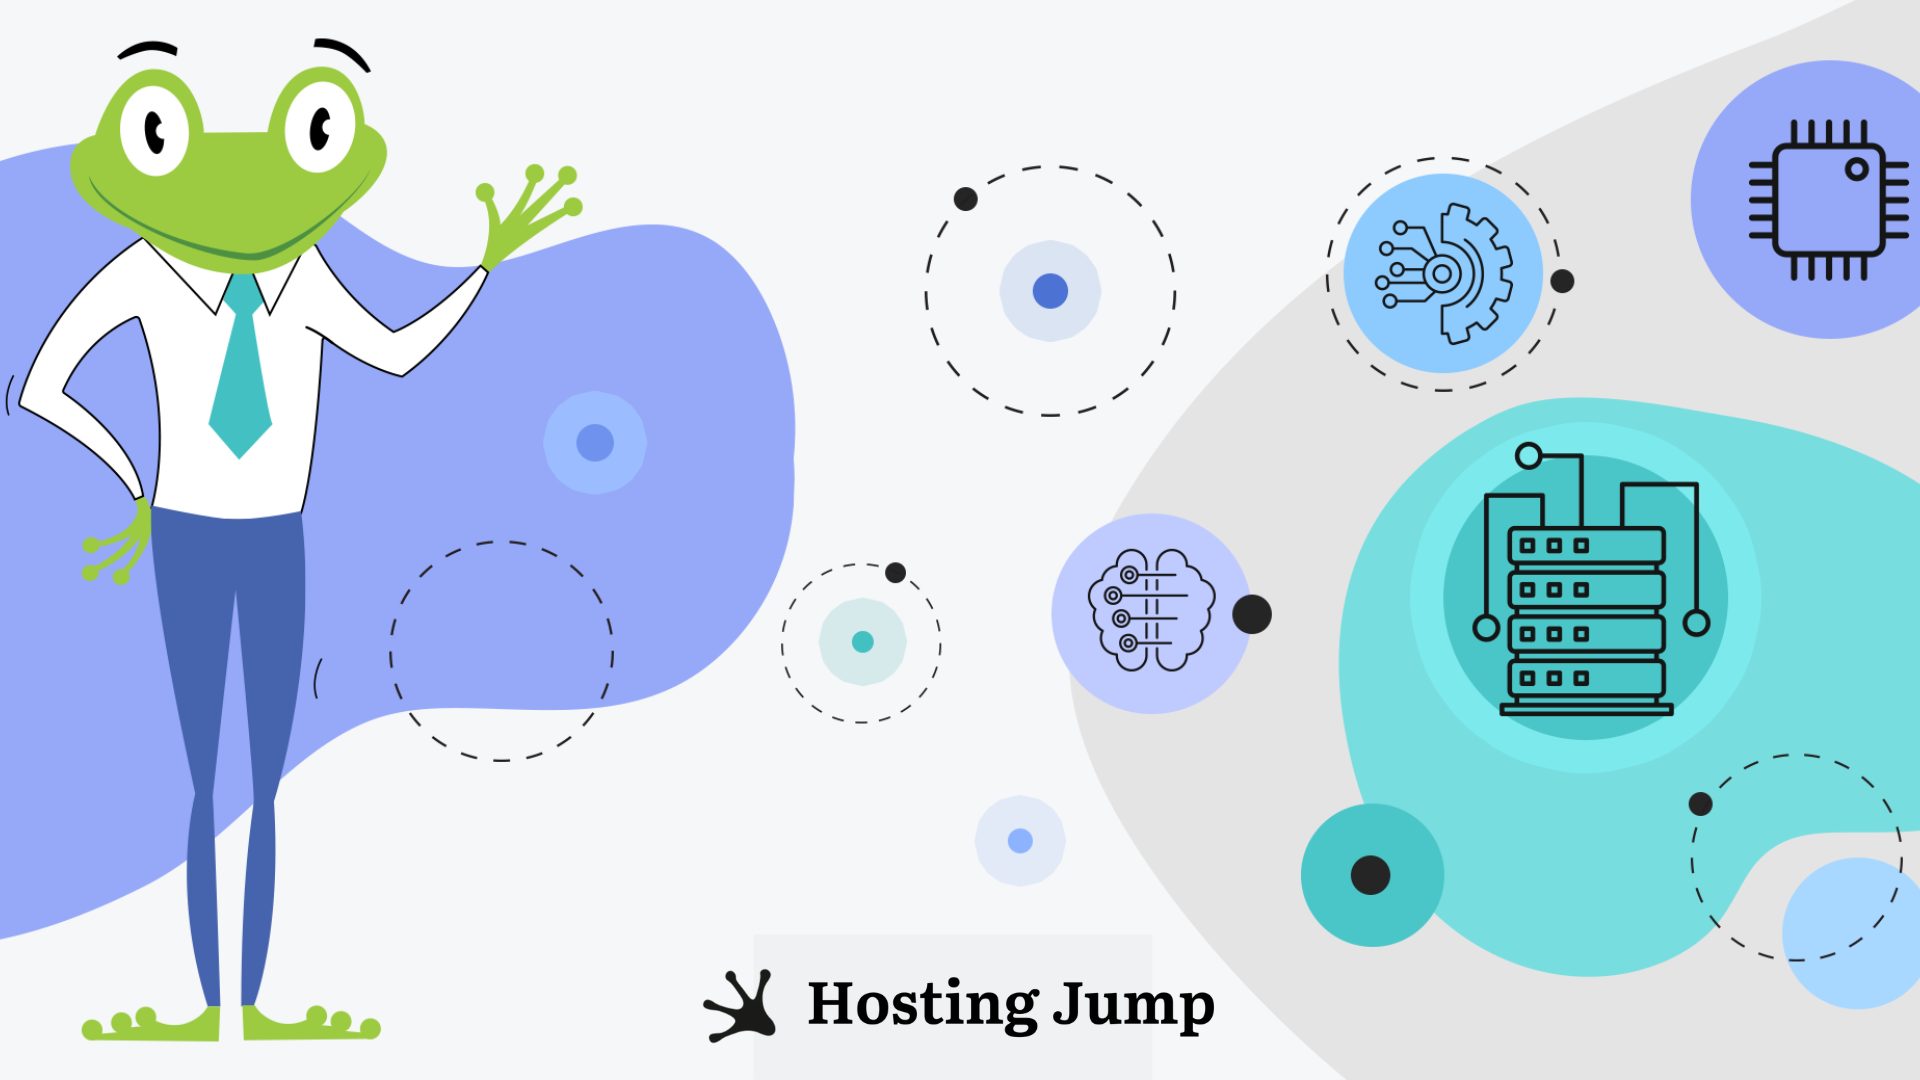 How to Manage the Active Processes in the Hosting Account With Process Manager by Hosting Jump